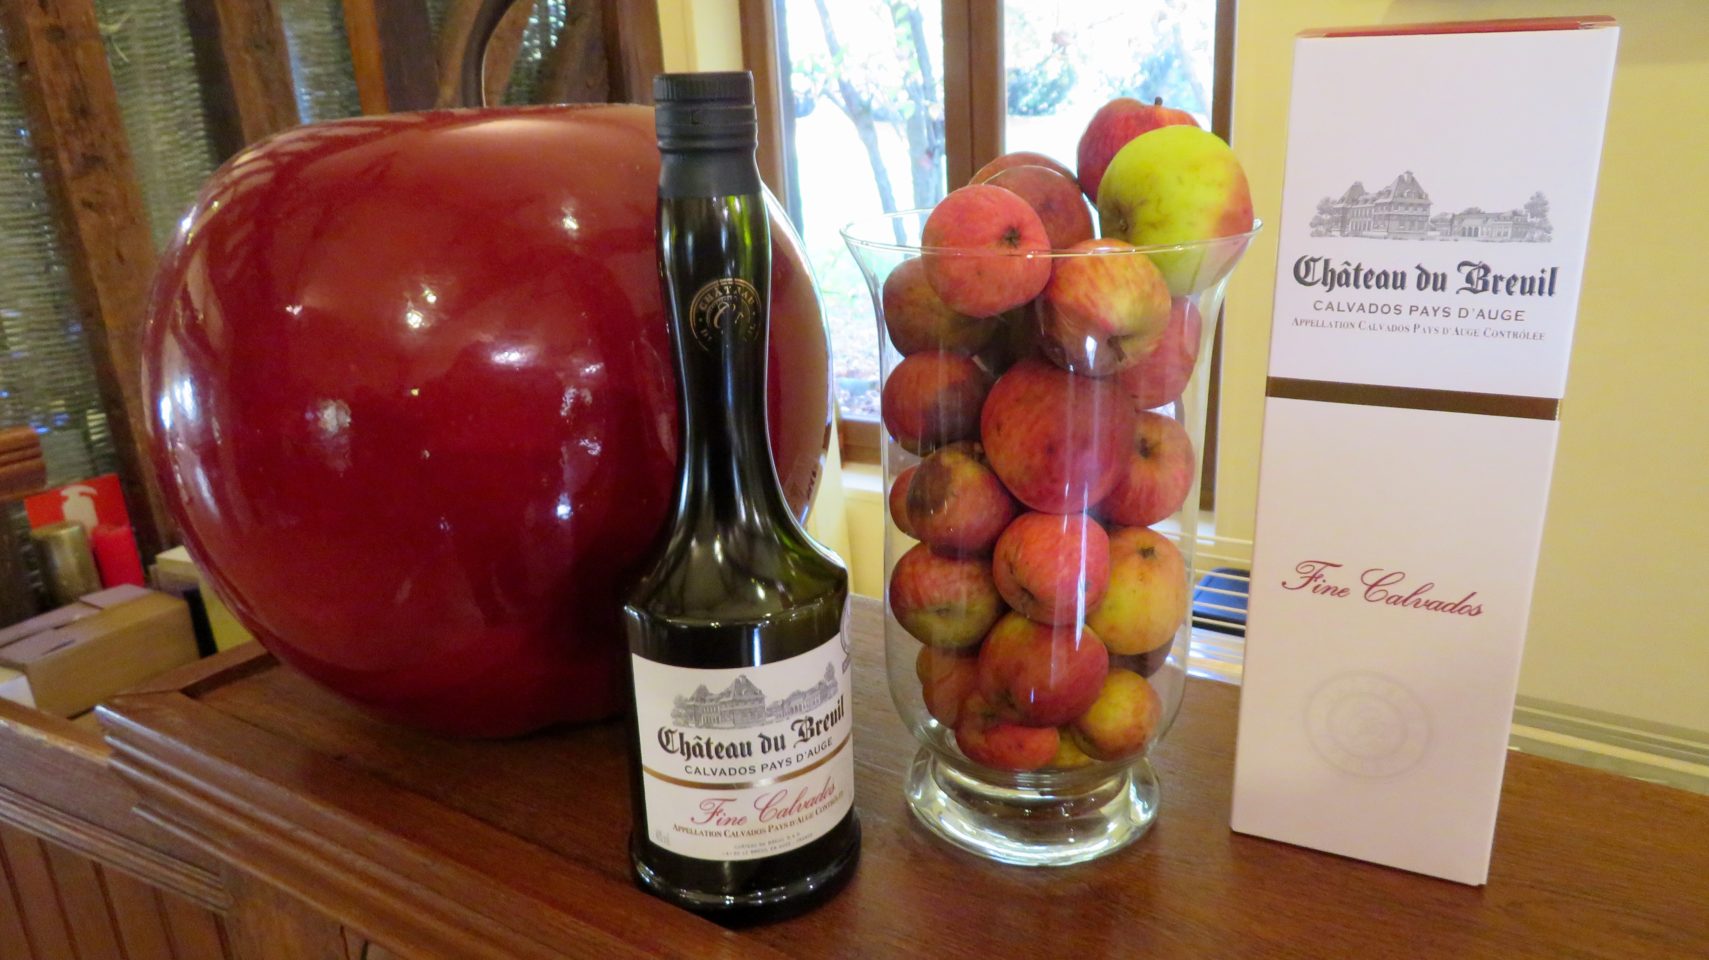 Calvados apple brandy from Chateau du Breuil in Normandie, France (Paris and Normandie AMAWaterways Cruise)